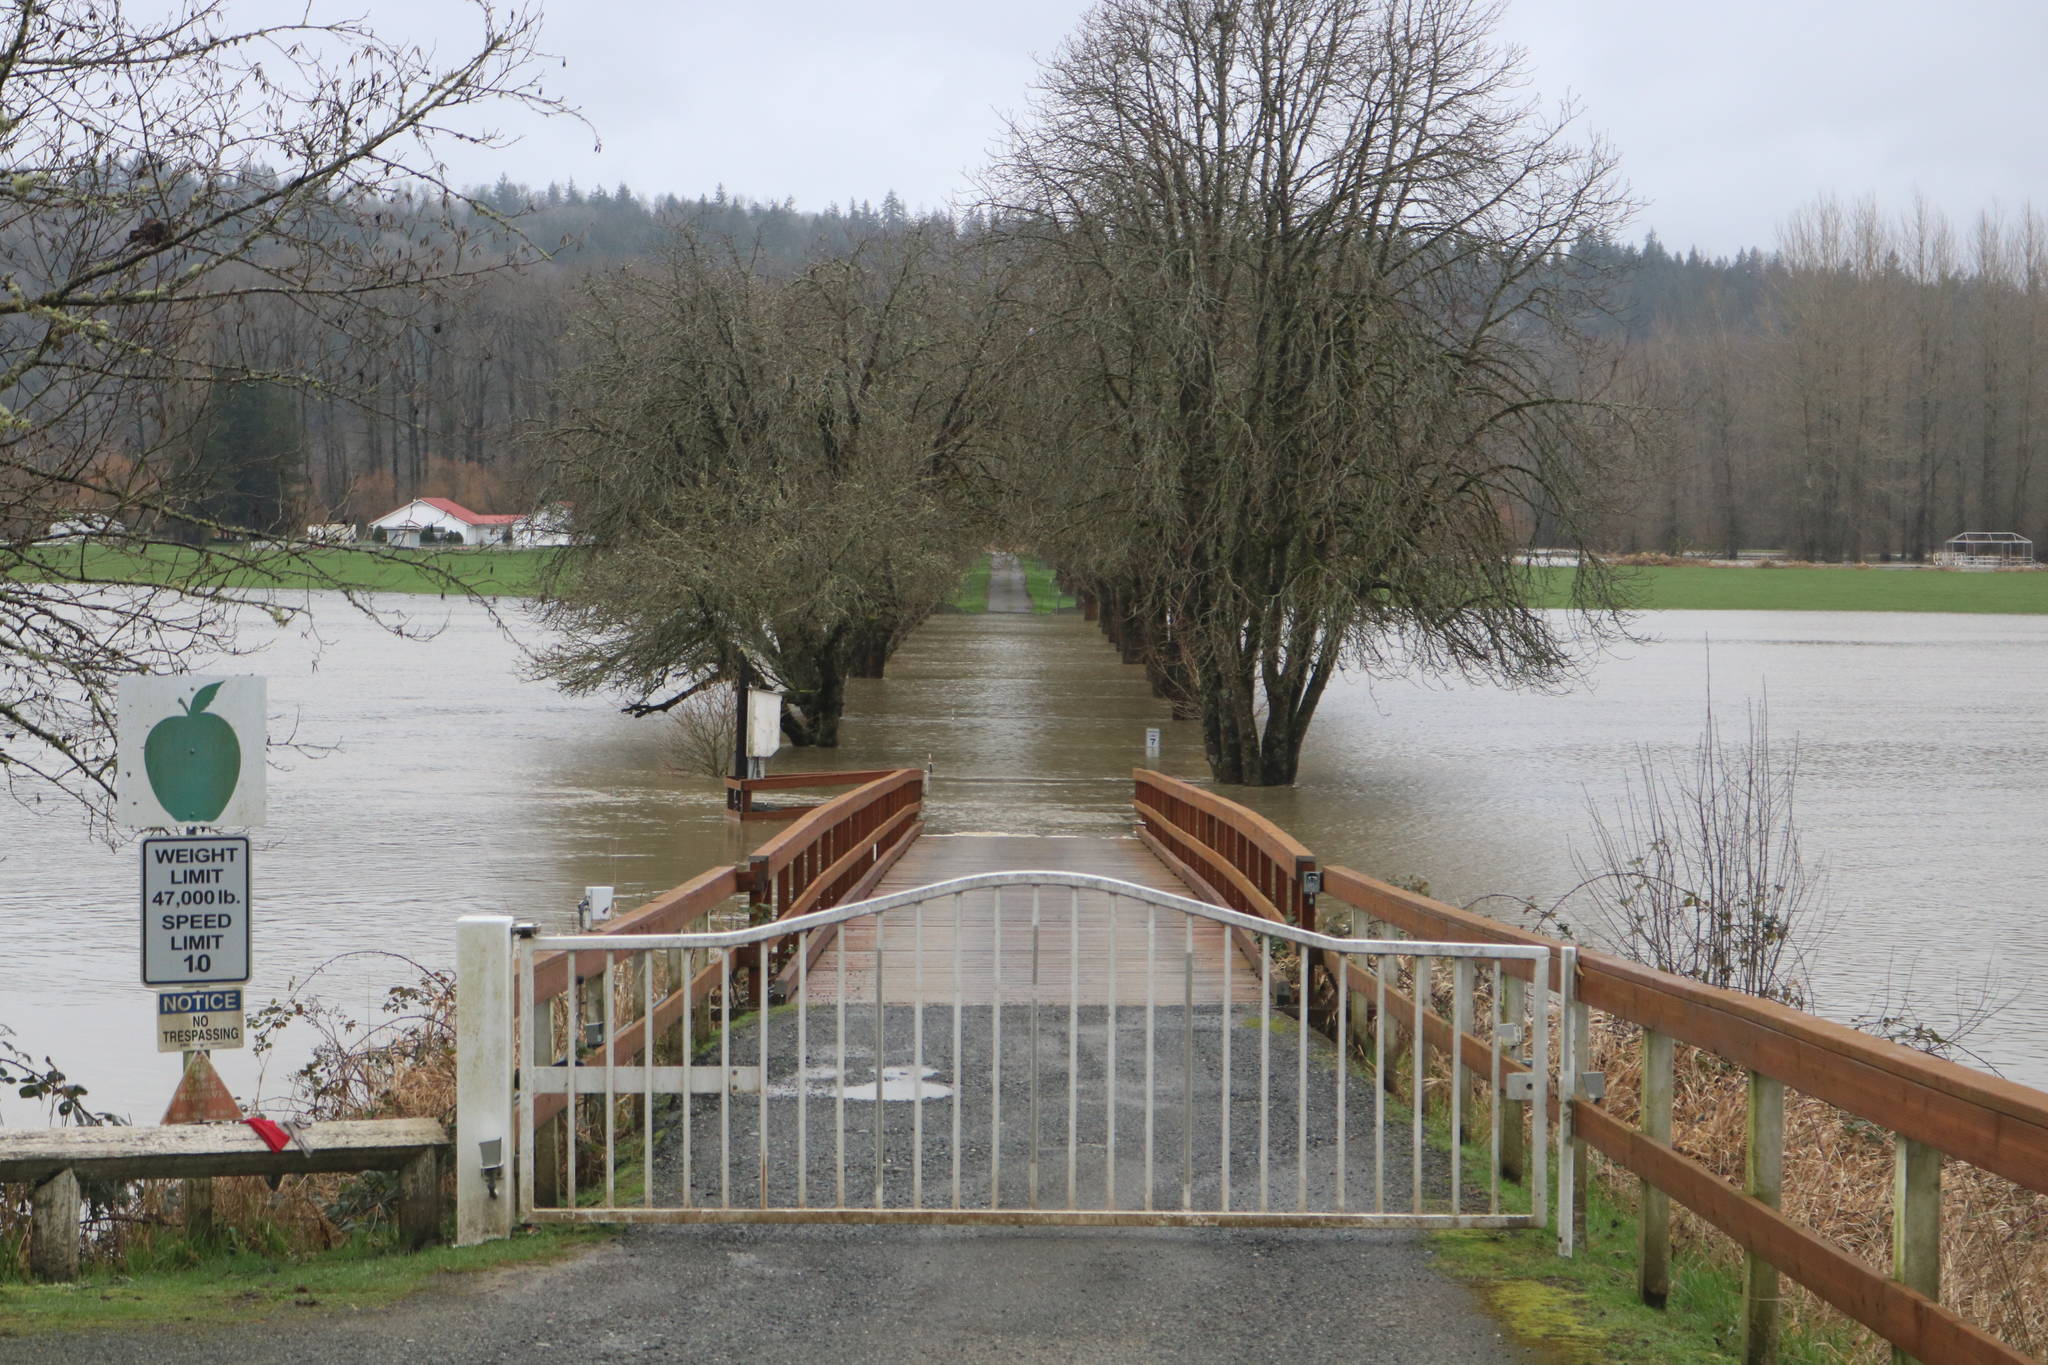 Much of Carnation Farms property was underwater on Feb. 7, 2020 after days of rain pushed the Snoqualmie River over its banks. Aaron Kunkler/staff photo